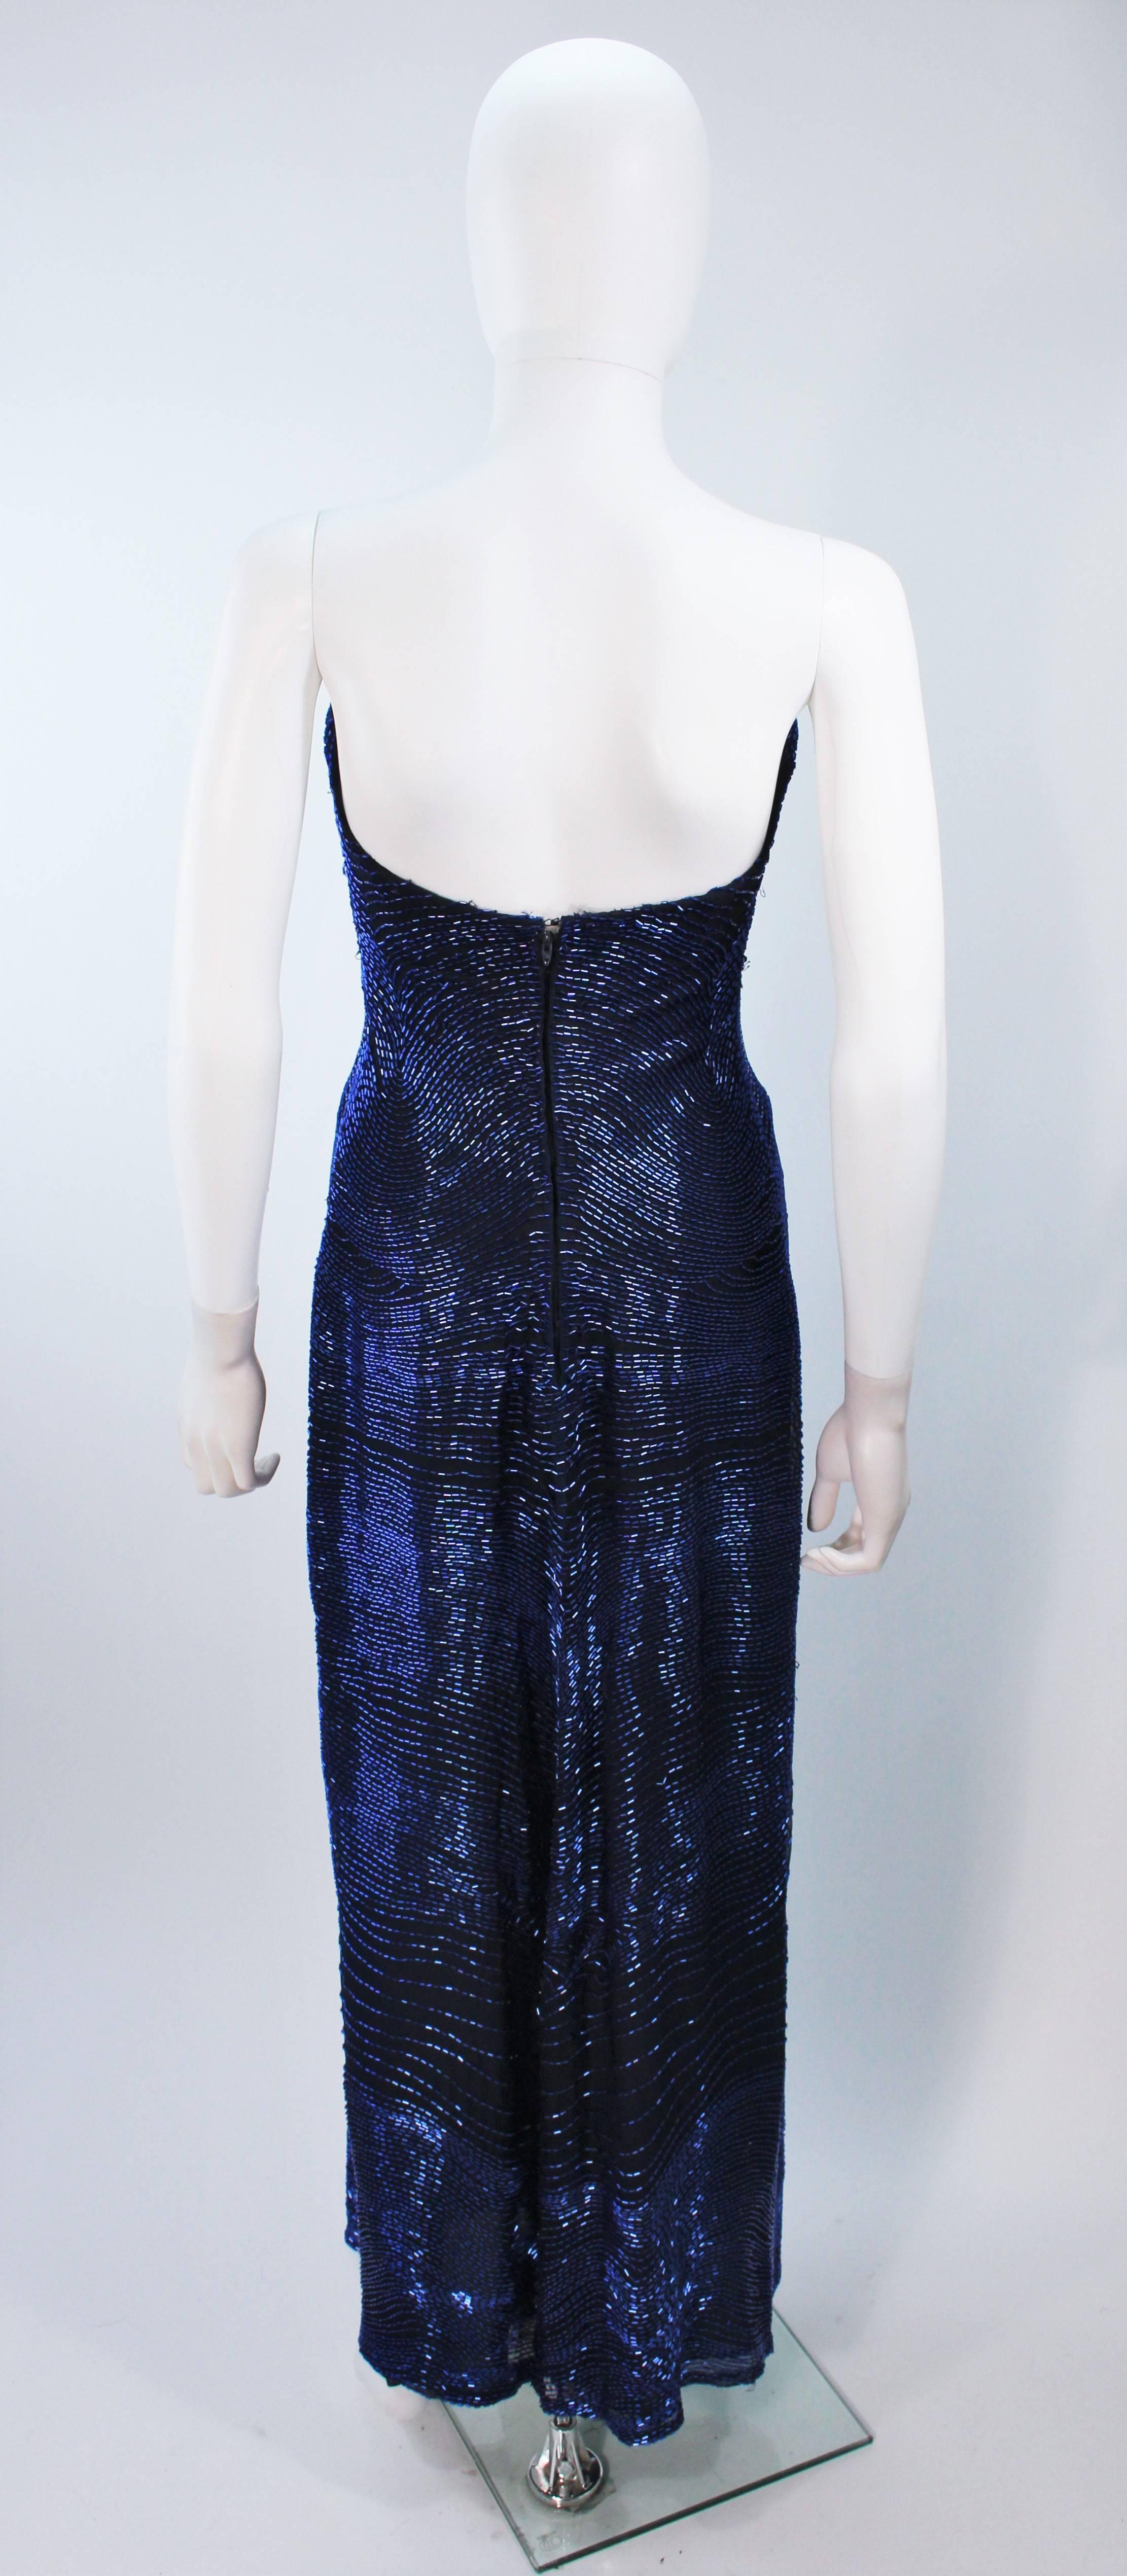 HALSTON Rare Blue Beaded Strapless Gown Size 2-6 3